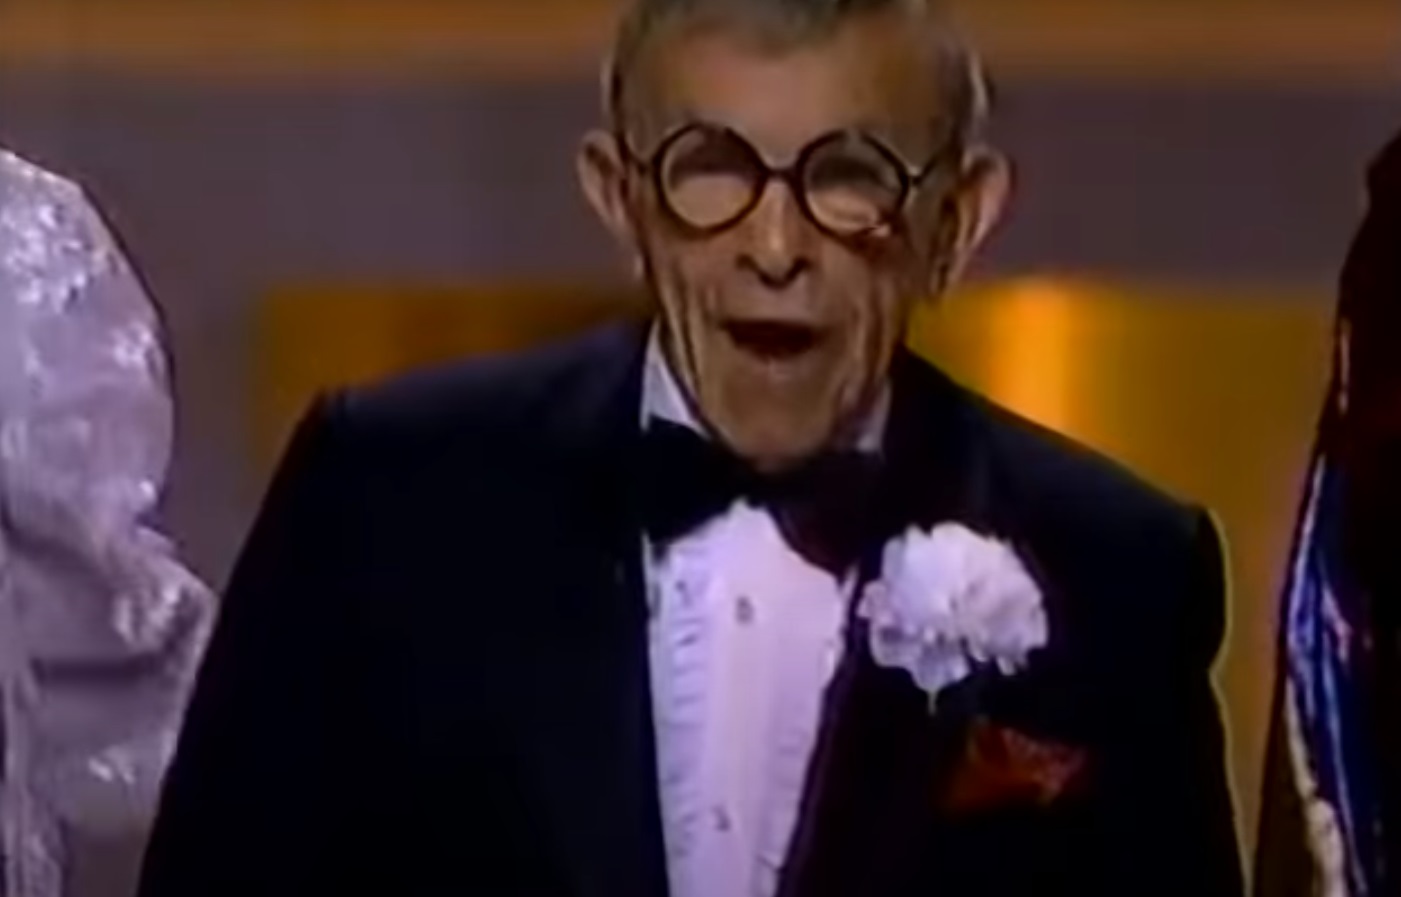 George Burns sings Stephen Sondheim's "Old Friends" at the 1986 Emmys